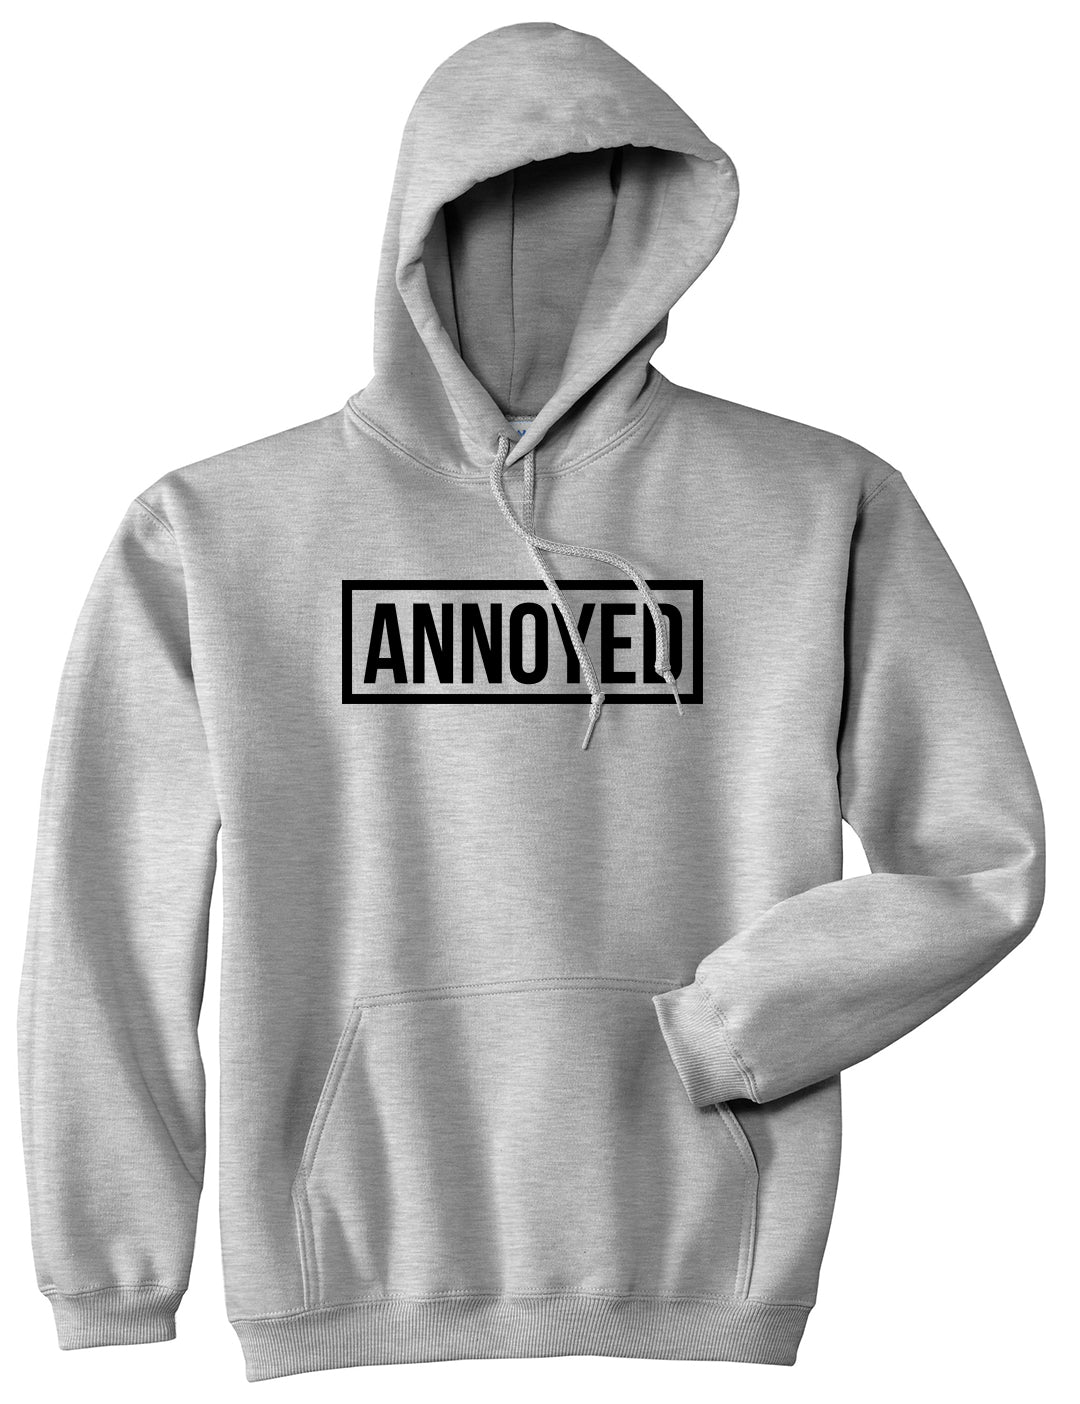 Annoyed Grey Pullover Hoodie by Kings Of NY